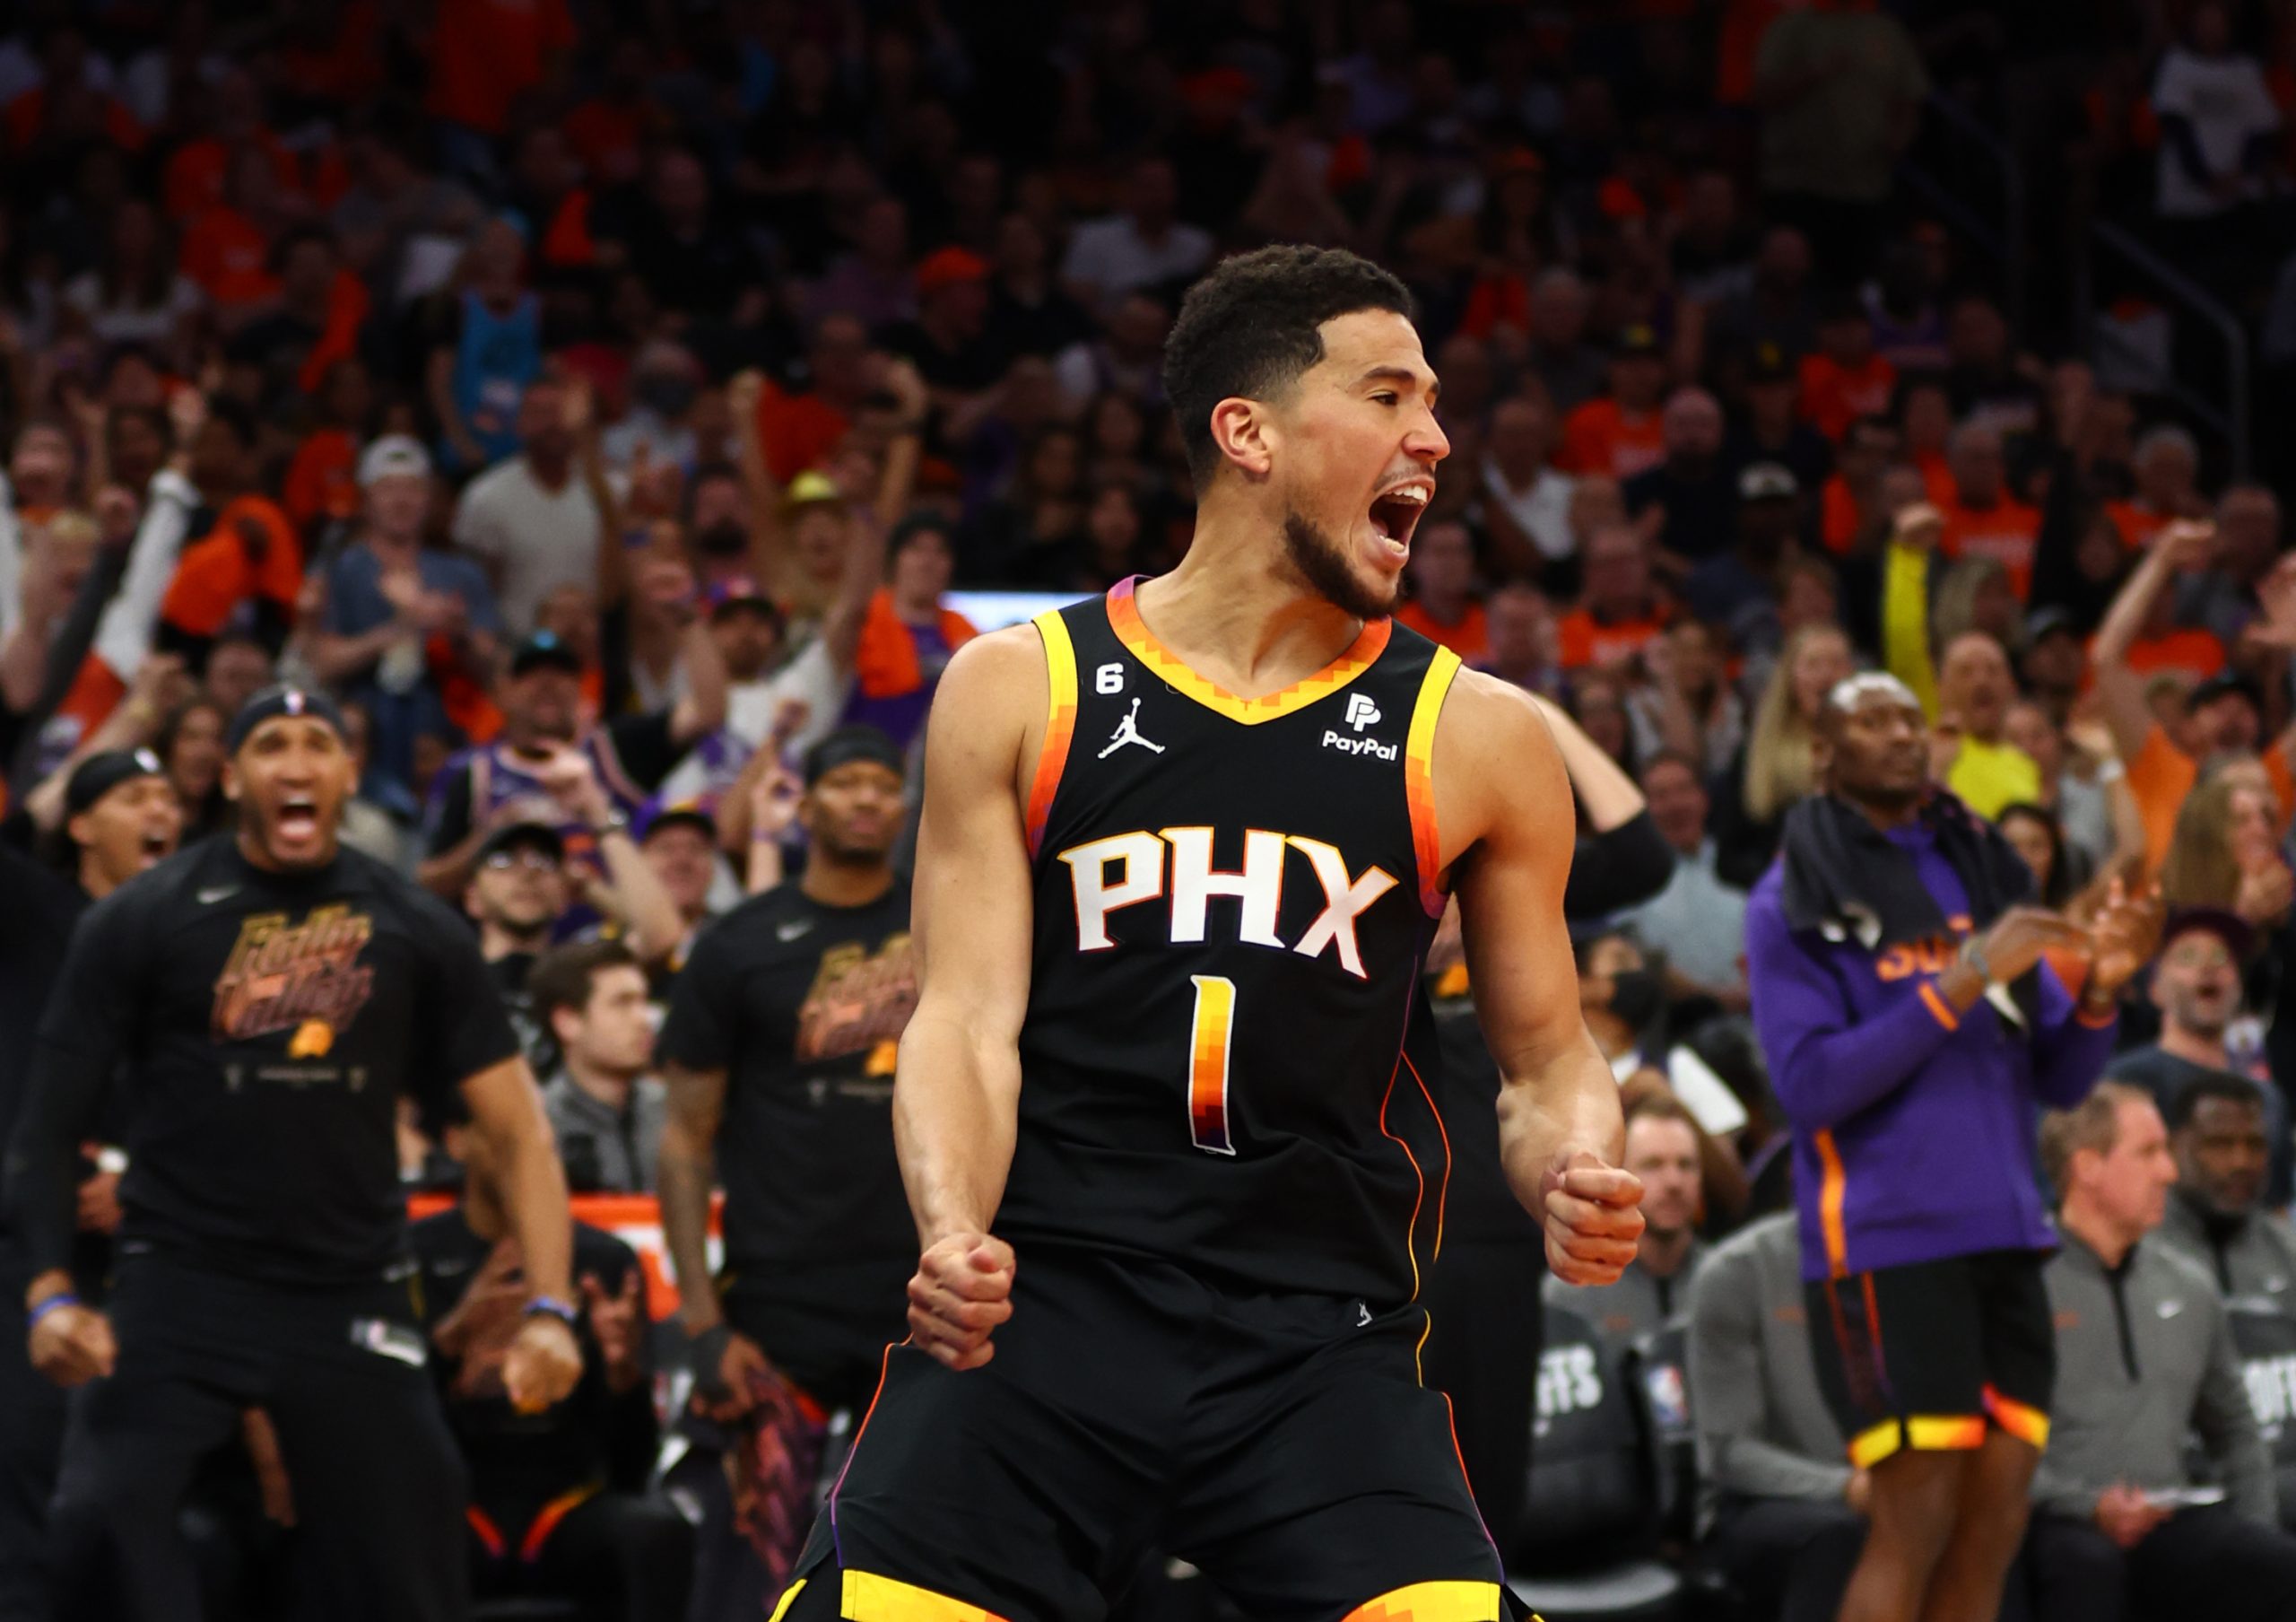 Apr 25, 2023; Phoenix, Arizona, USA; Phoenix Suns guard Devin Booker (1) celebrates after slam dunking the ball against the Los Angeles Clippers during the second half in game five of the 2023 NBA playoffs at Footprint Center. Mandatory Credit: Mark J. Rebilas-USA TODAY Sports